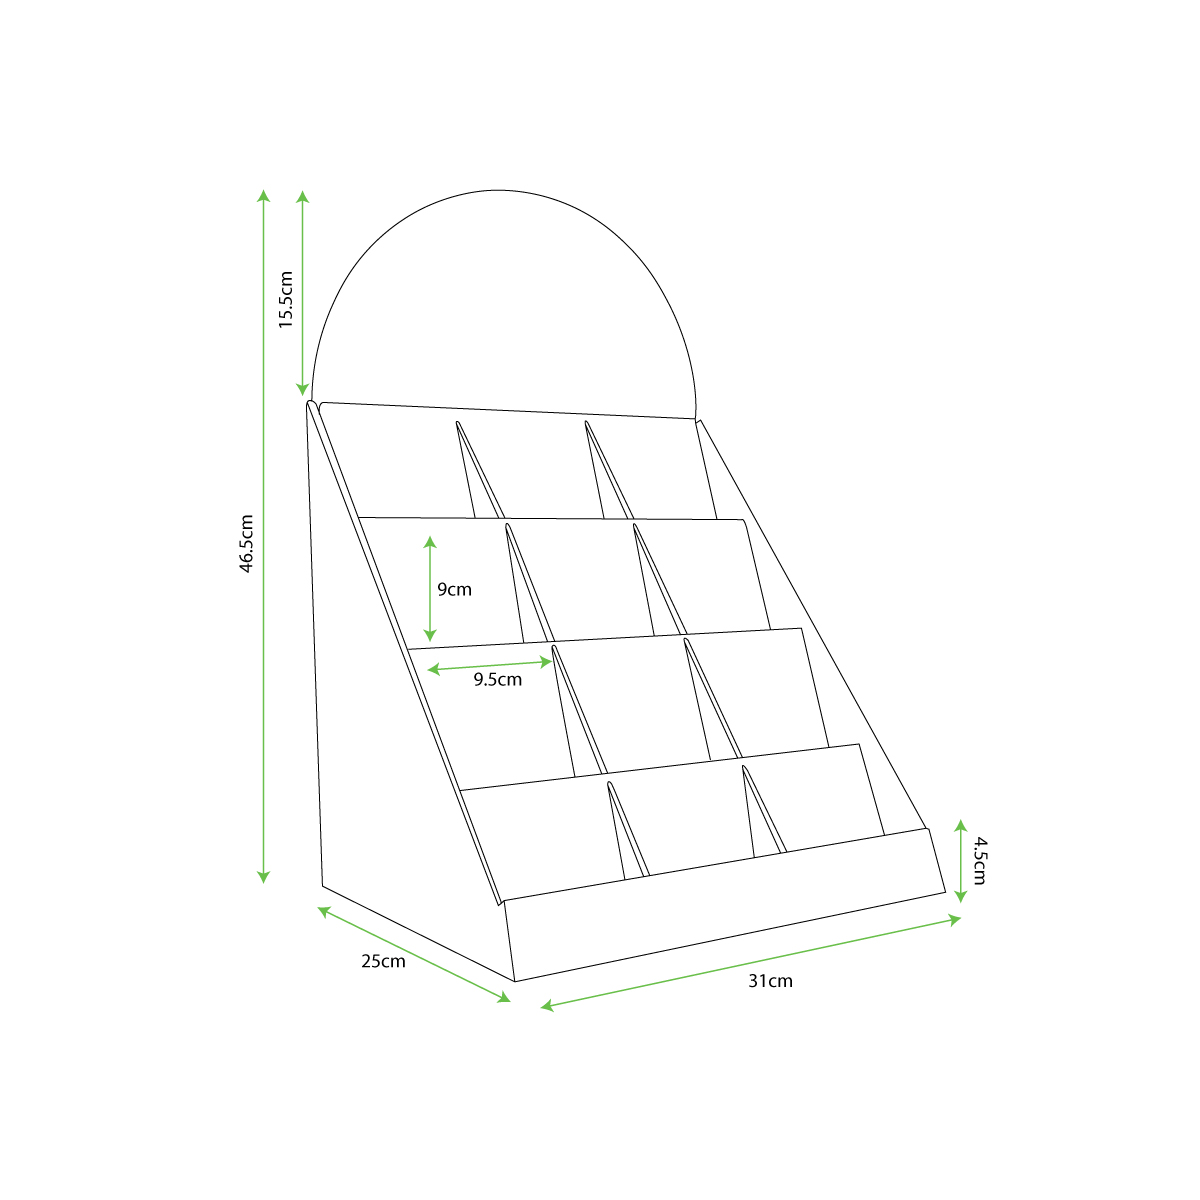 Lanlay - Cell Display - Dimensions